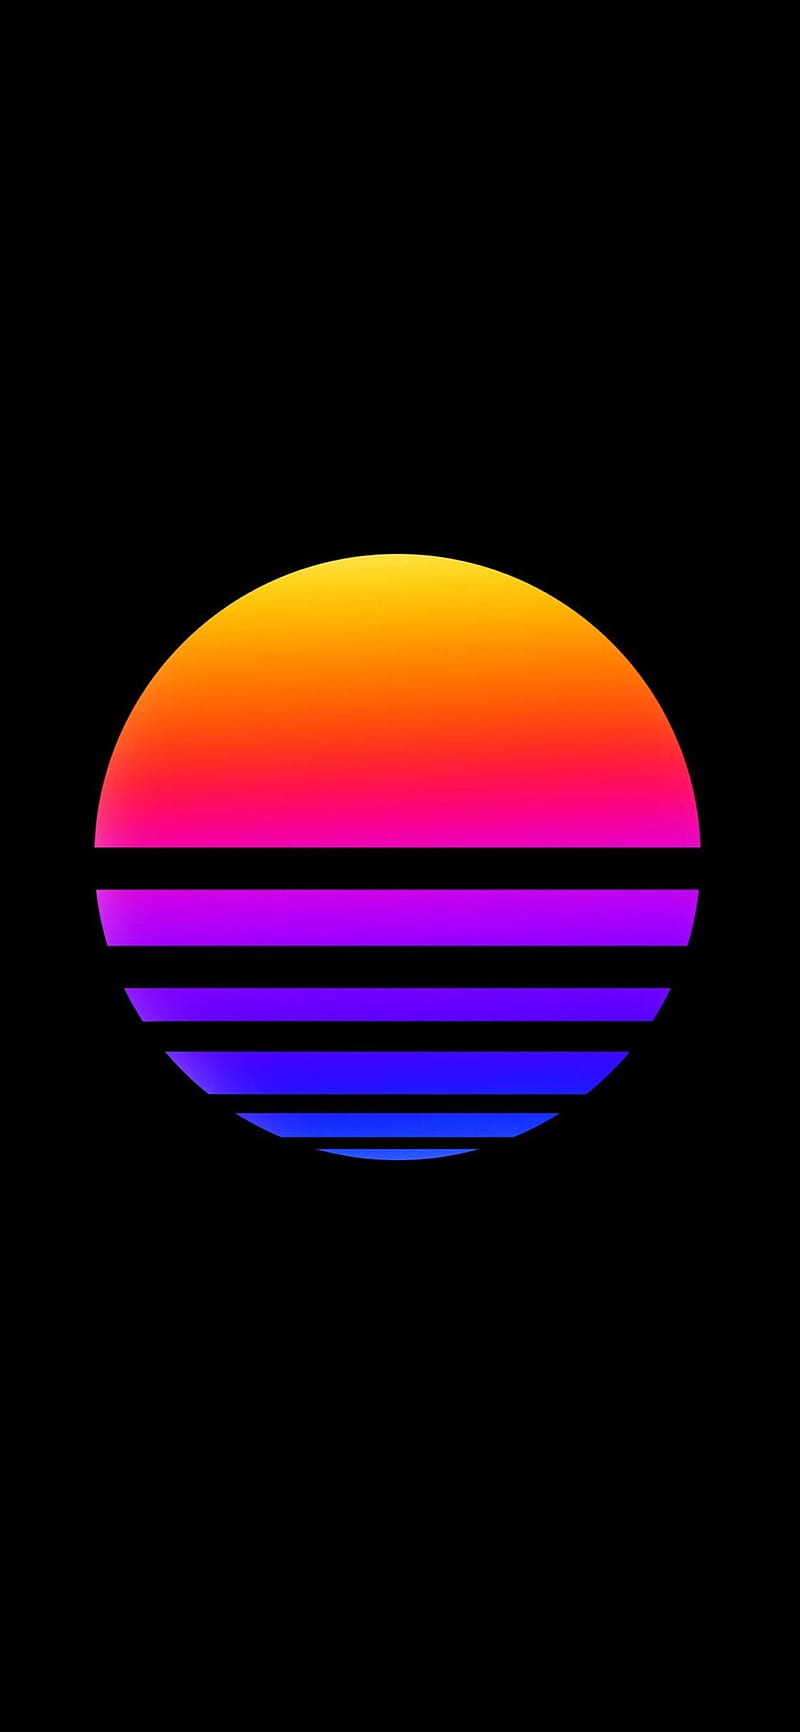 Outrun Aesthetics Phone Wallpaper I Just Finished! | 80s aesthetic wallpaper,  Neon wallpaper, Phone wallpaper